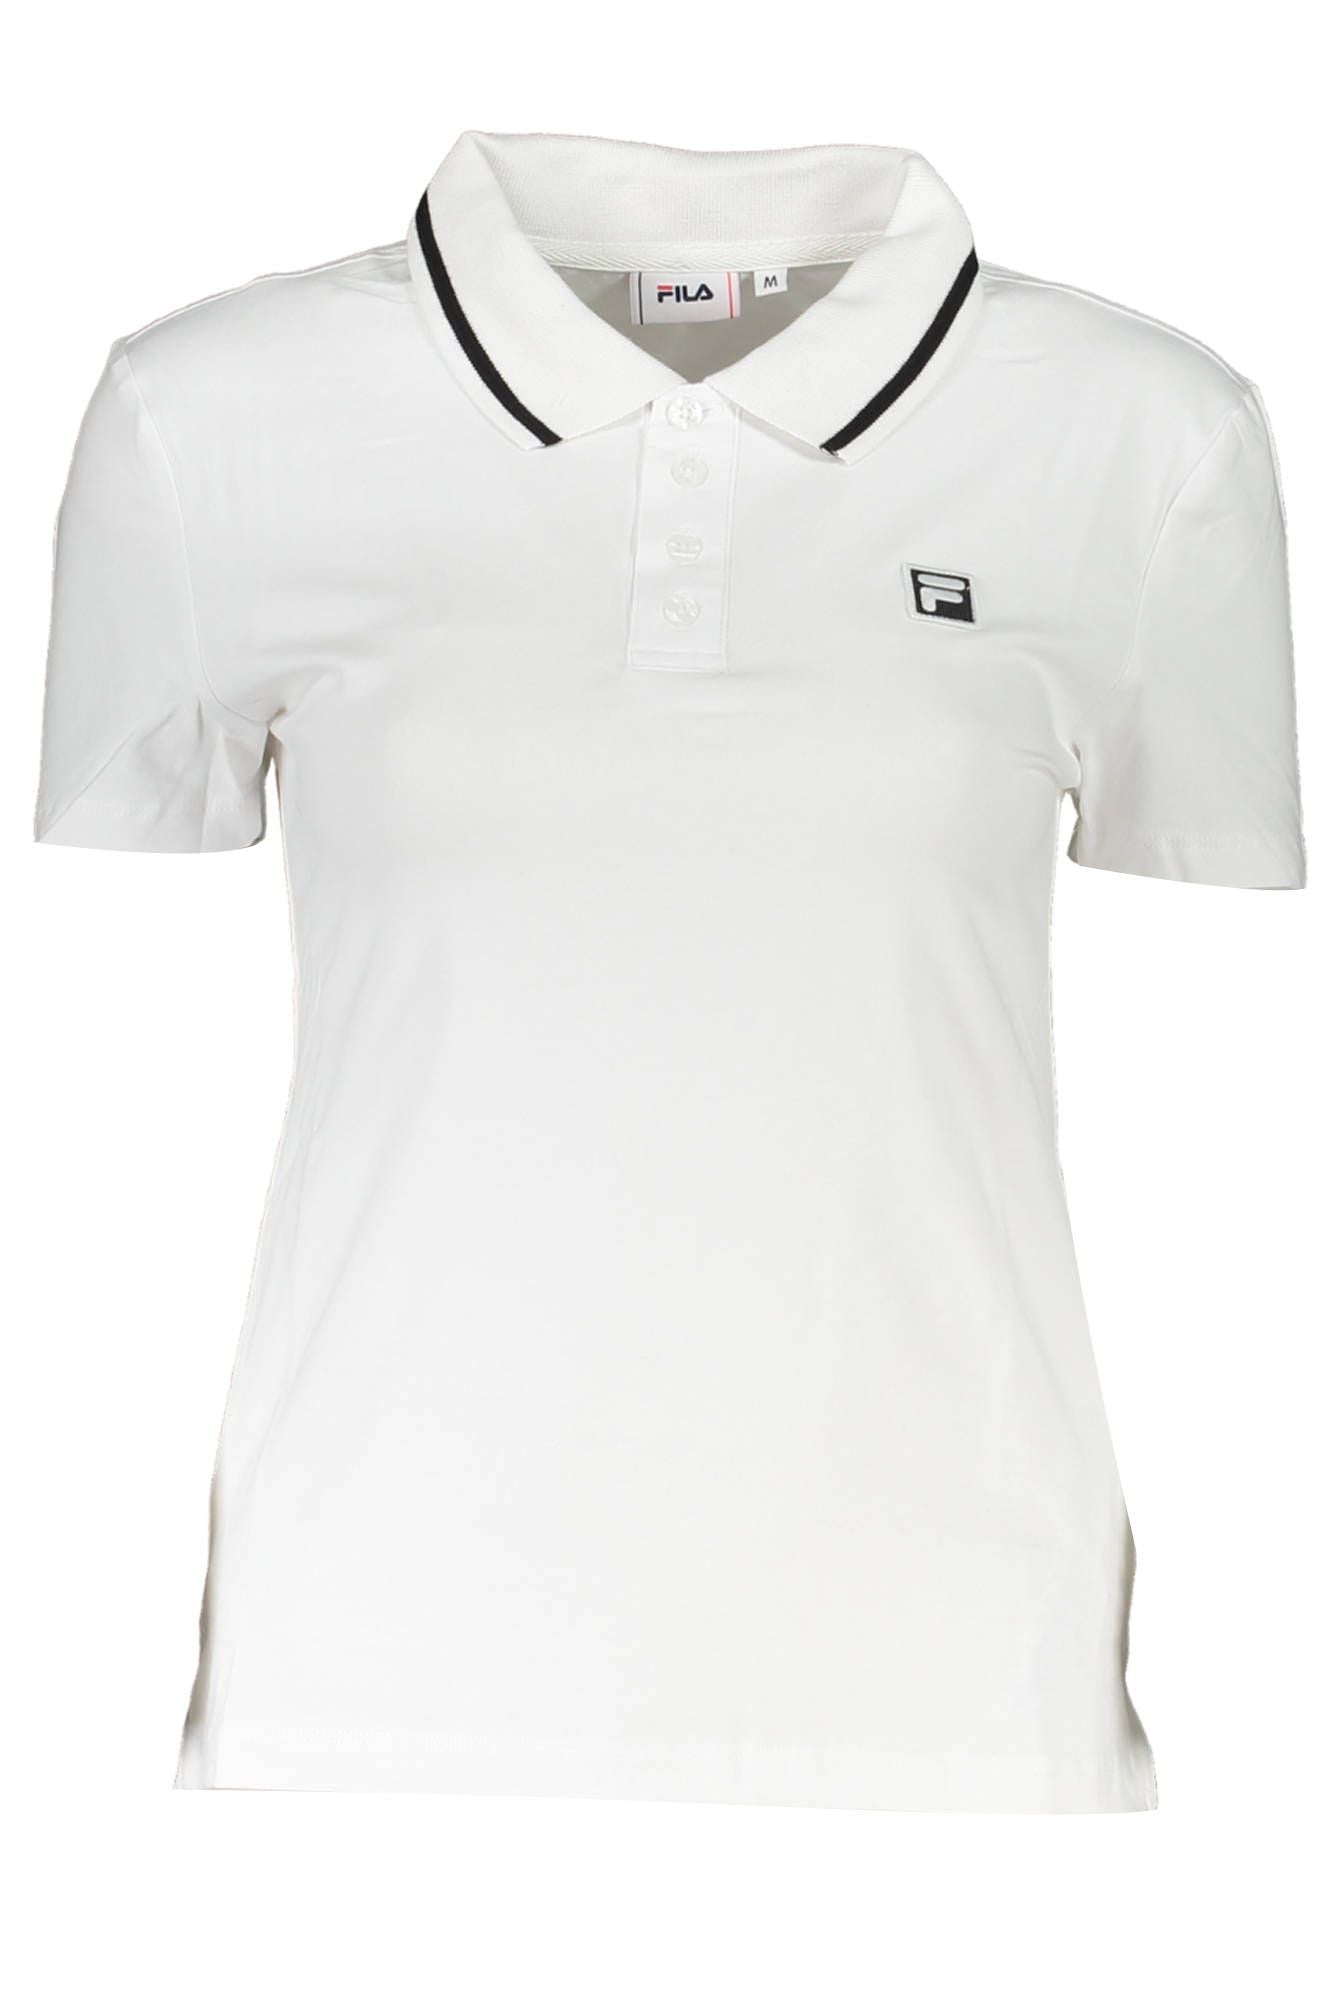 Chic White Polo with Contrasting Accents